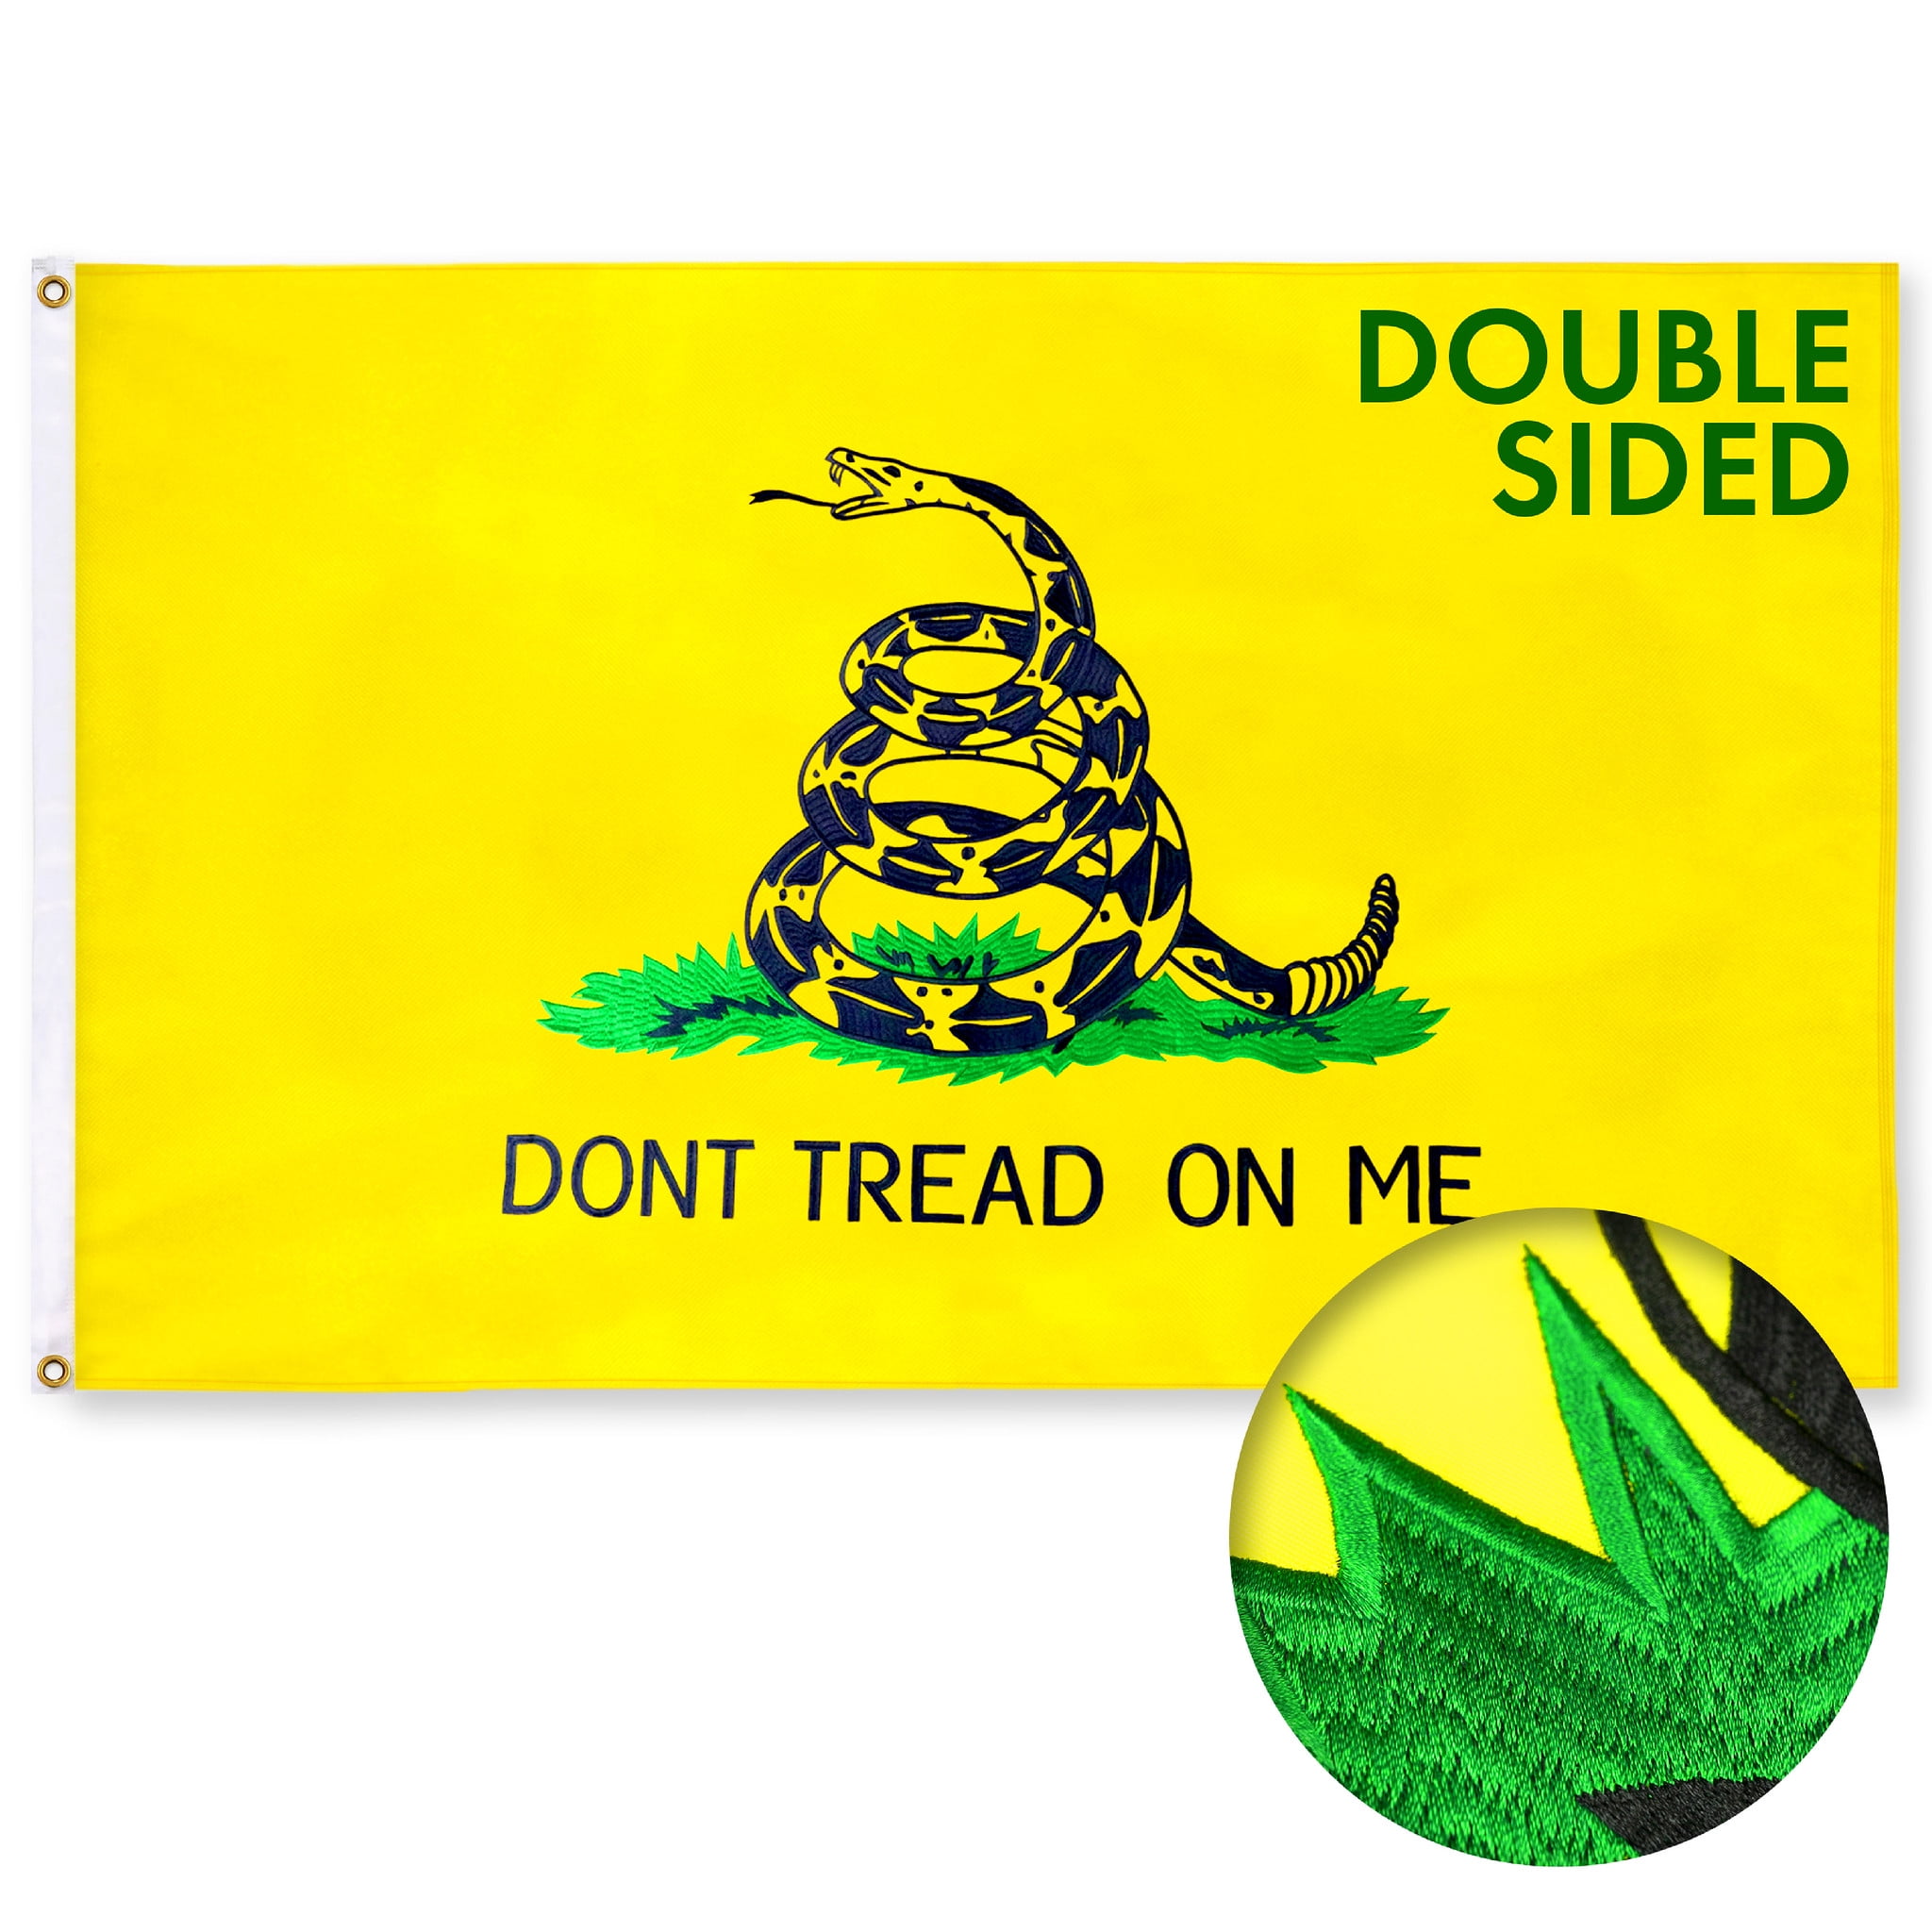 4x6 12 Polyester Flags Gadsden Black & White Dont Tread on Me Miniature Desk & Table Flags Includes 12 Polyester Small Mini Stick Flags Ant Enterprise Pack of 12 Dozen